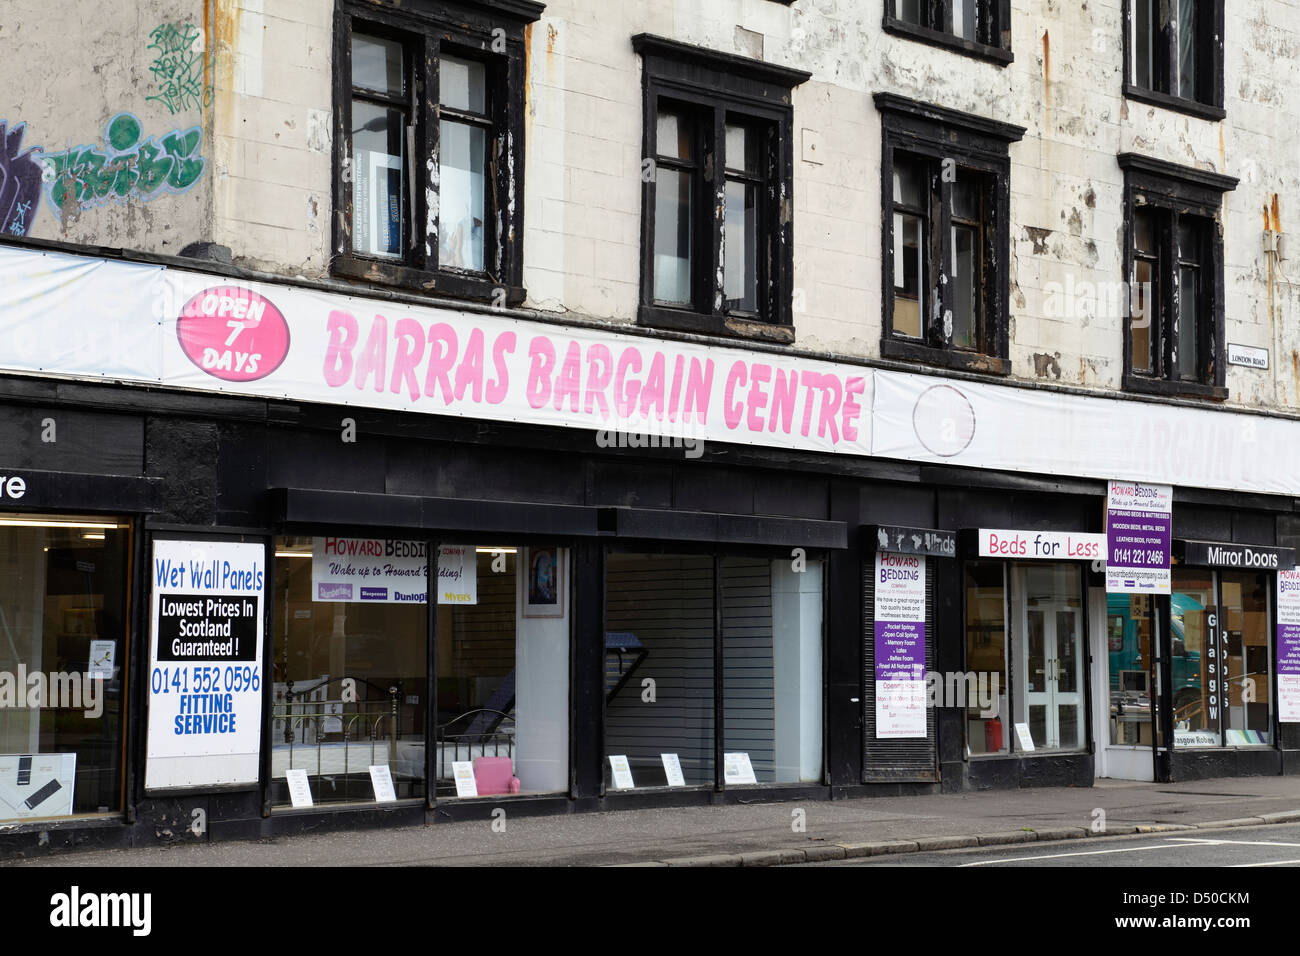 This store is permanently closed. The Barras Bargain Centre on London Road, Glasgow, Scotland, UK, Europe Stock Photo